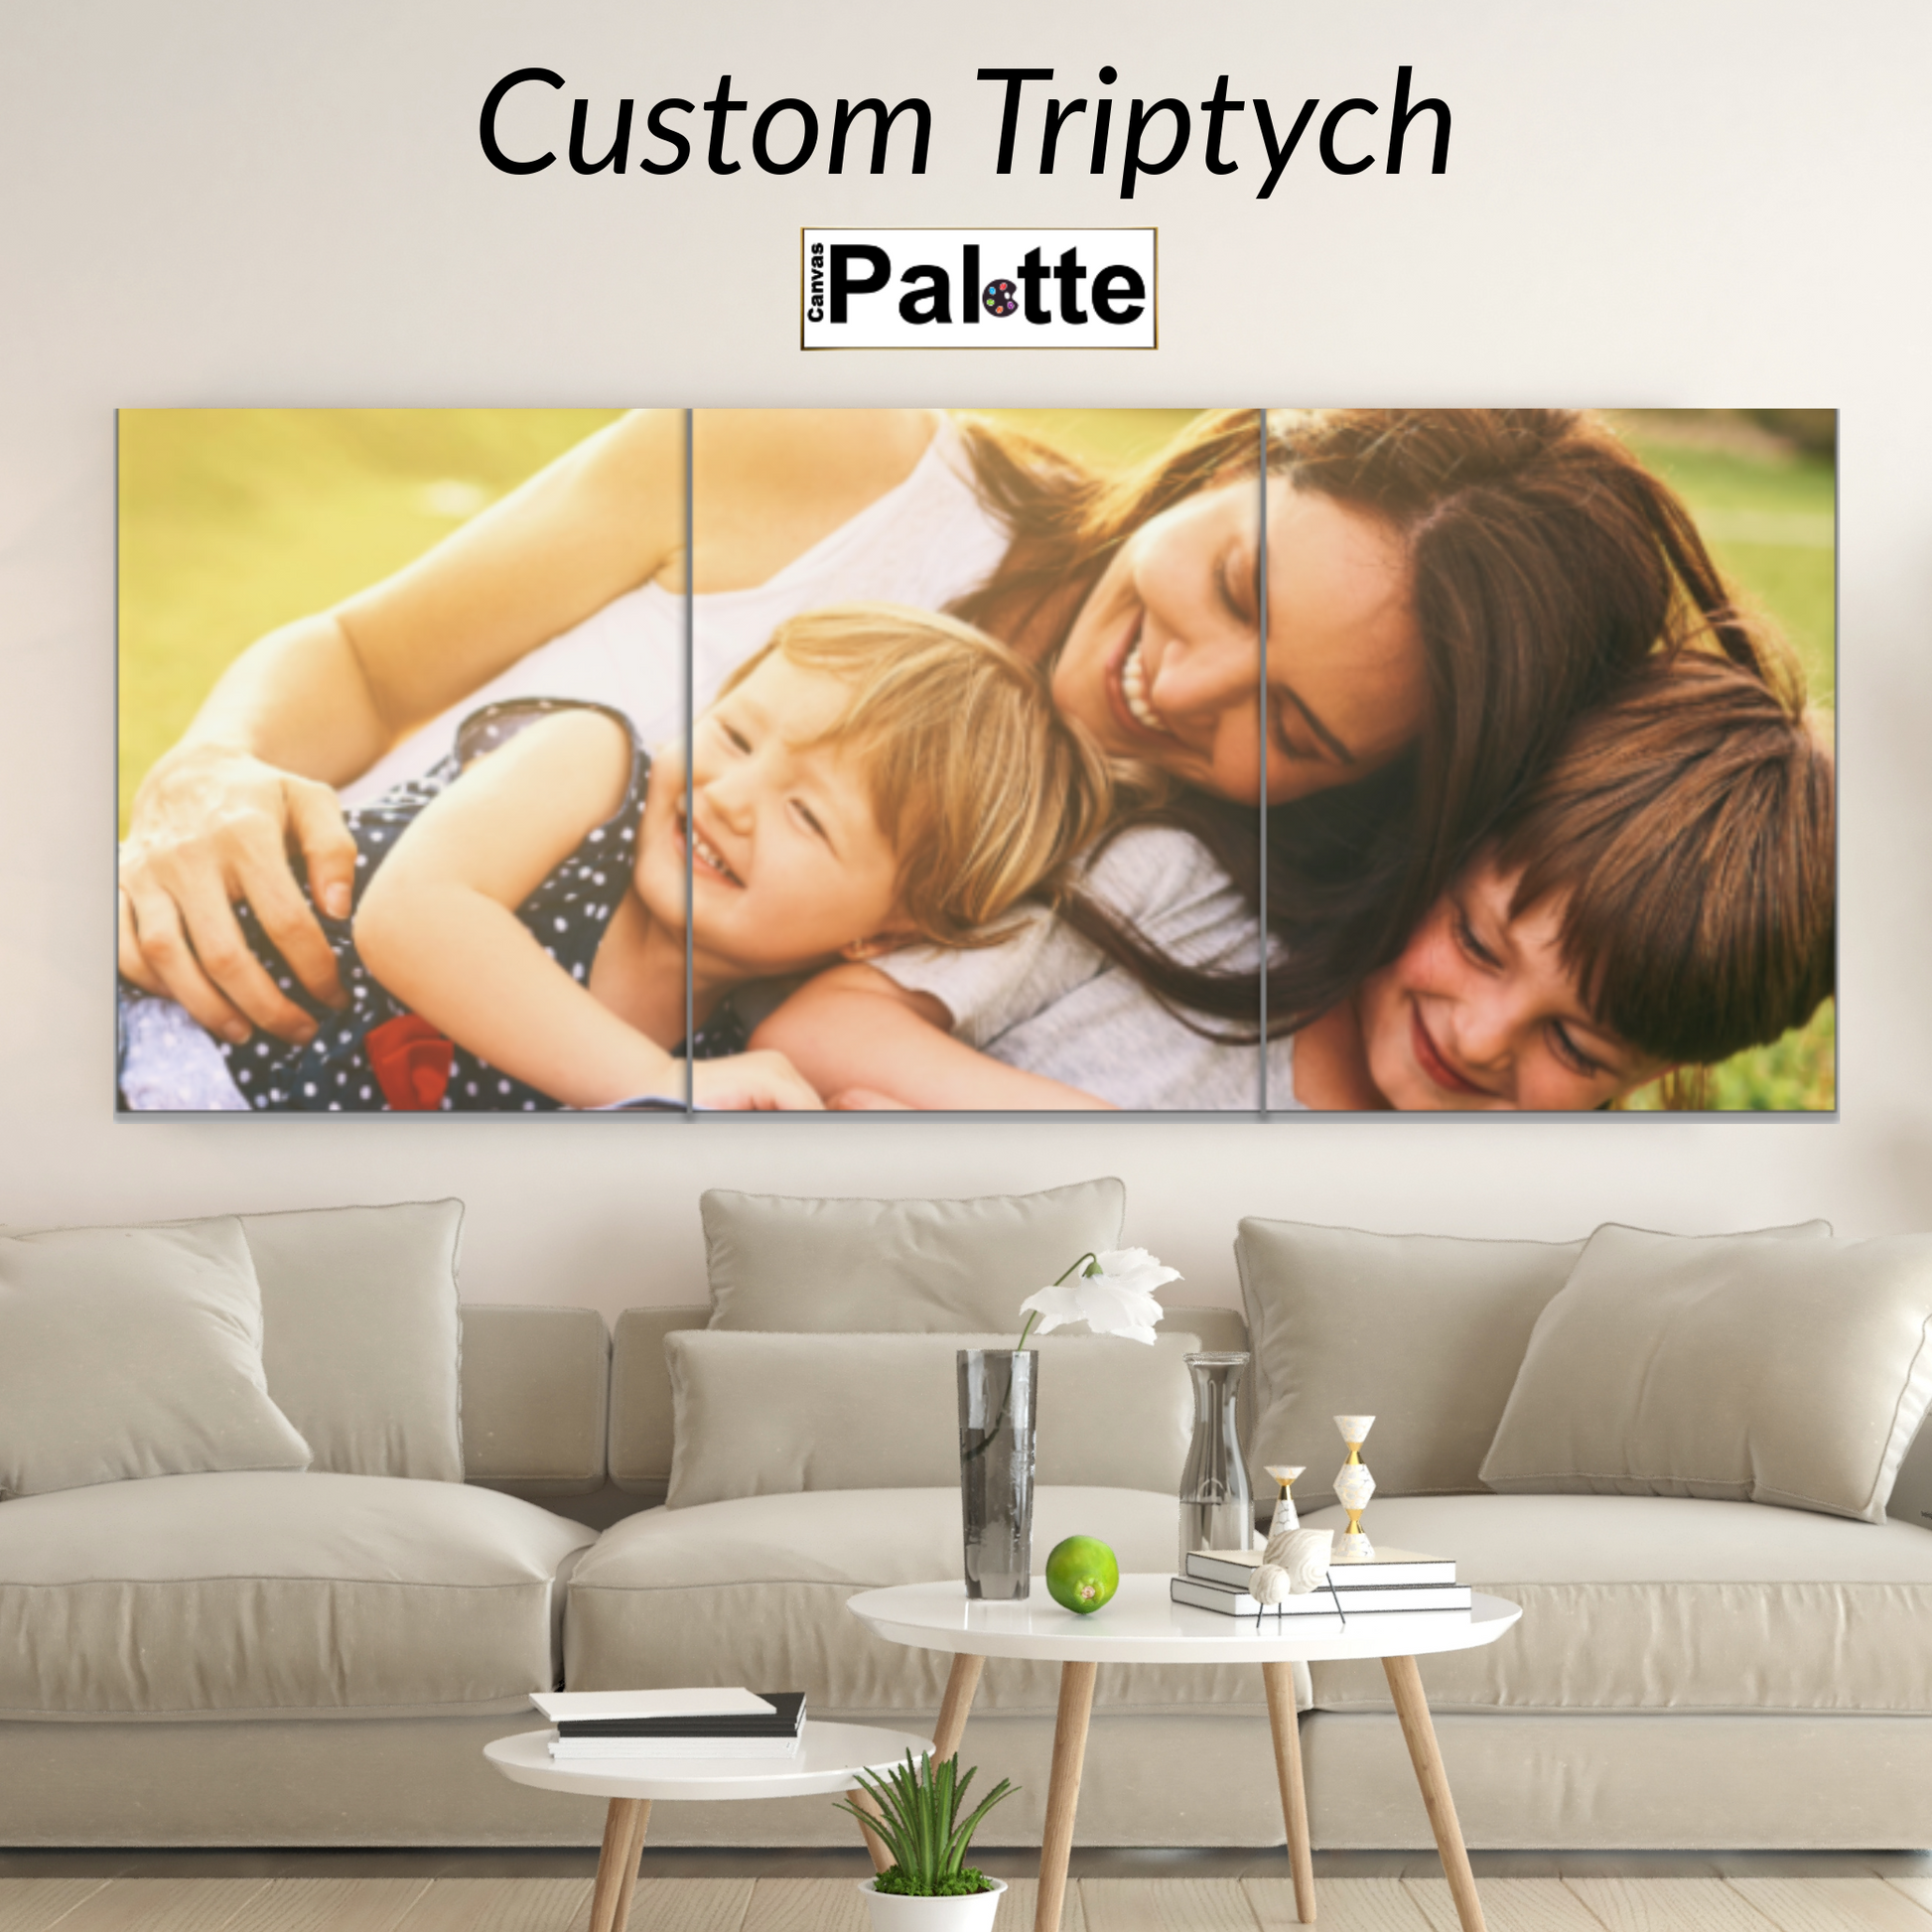 Example of a personalised triptych printed on Canvas Palette. The photo shows a family, the mother and her two children laughing.